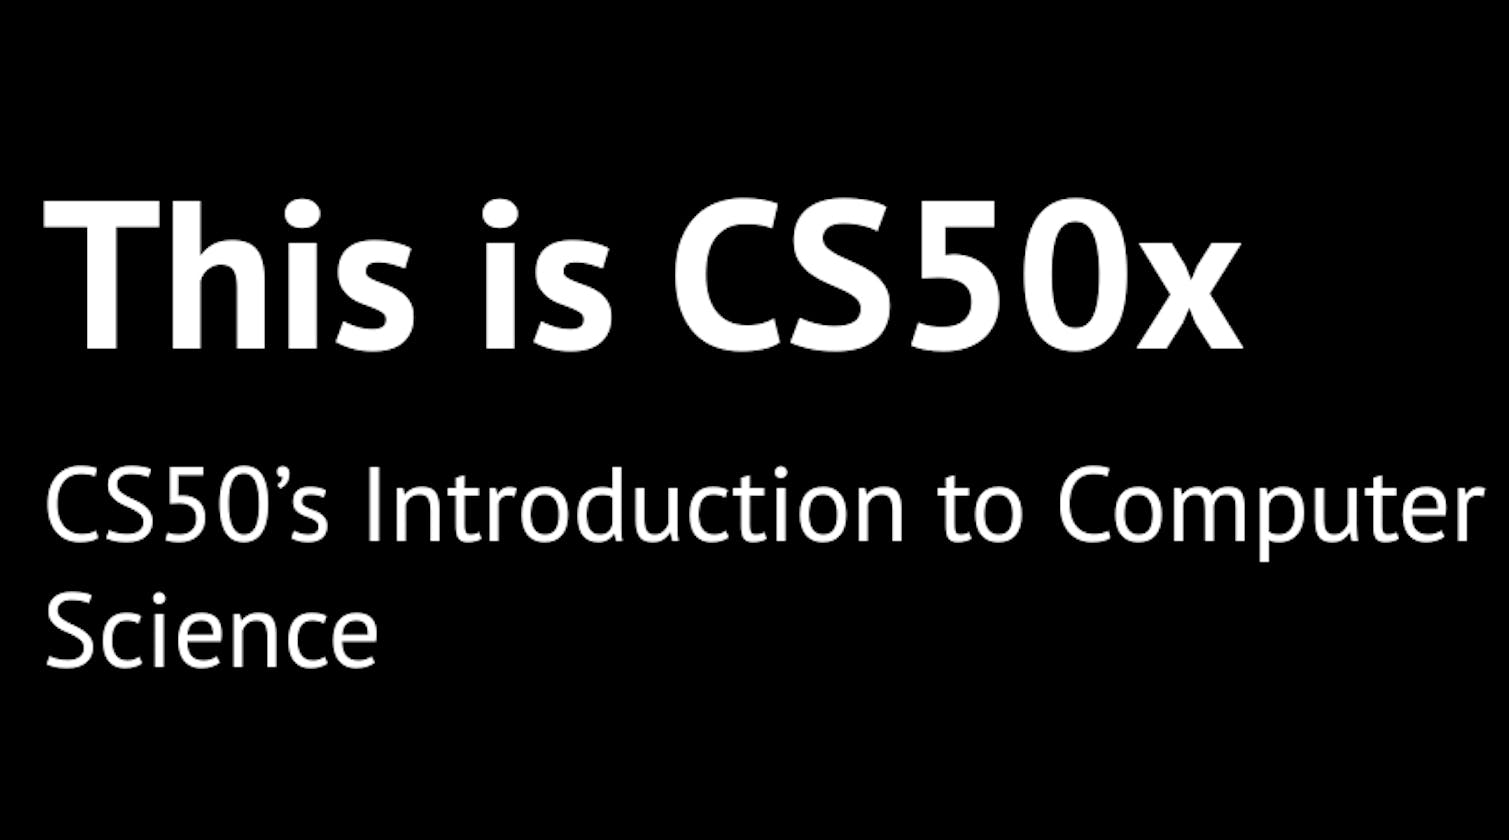 I completed Harvard's CS50 (Without Certificate) and You should try it once in your life